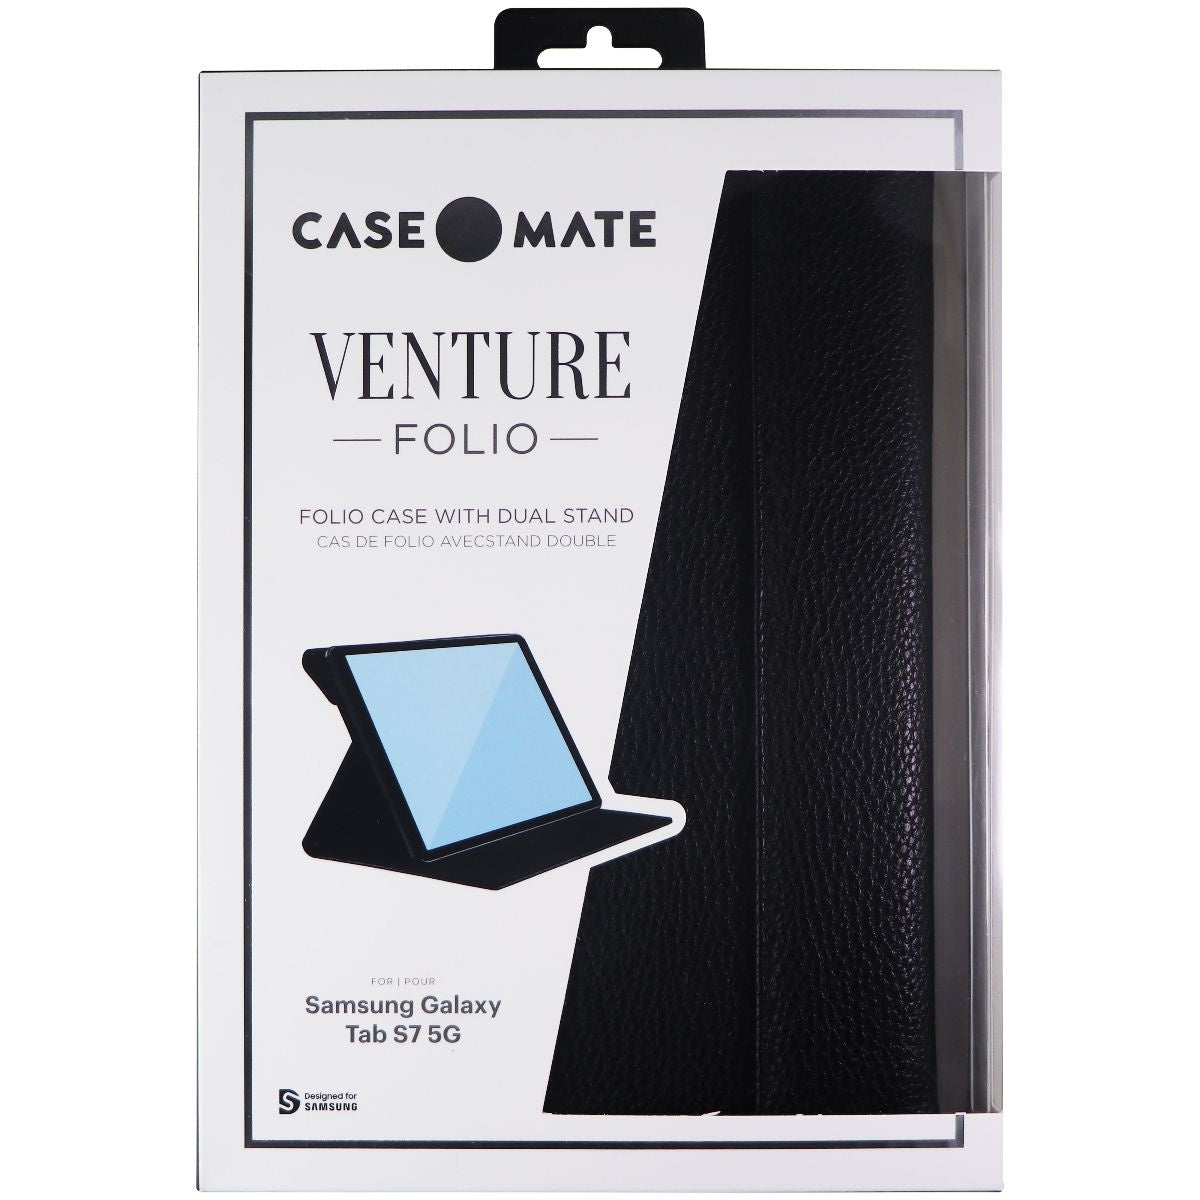 Case-Mate Venture Folio Case with Stand for Samsung Galaxy Tab S7 5G - Black iPad/Tablet Accessories - Cases, Covers, Keyboard Folios Case-Mate    - Simple Cell Bulk Wholesale Pricing - USA Seller